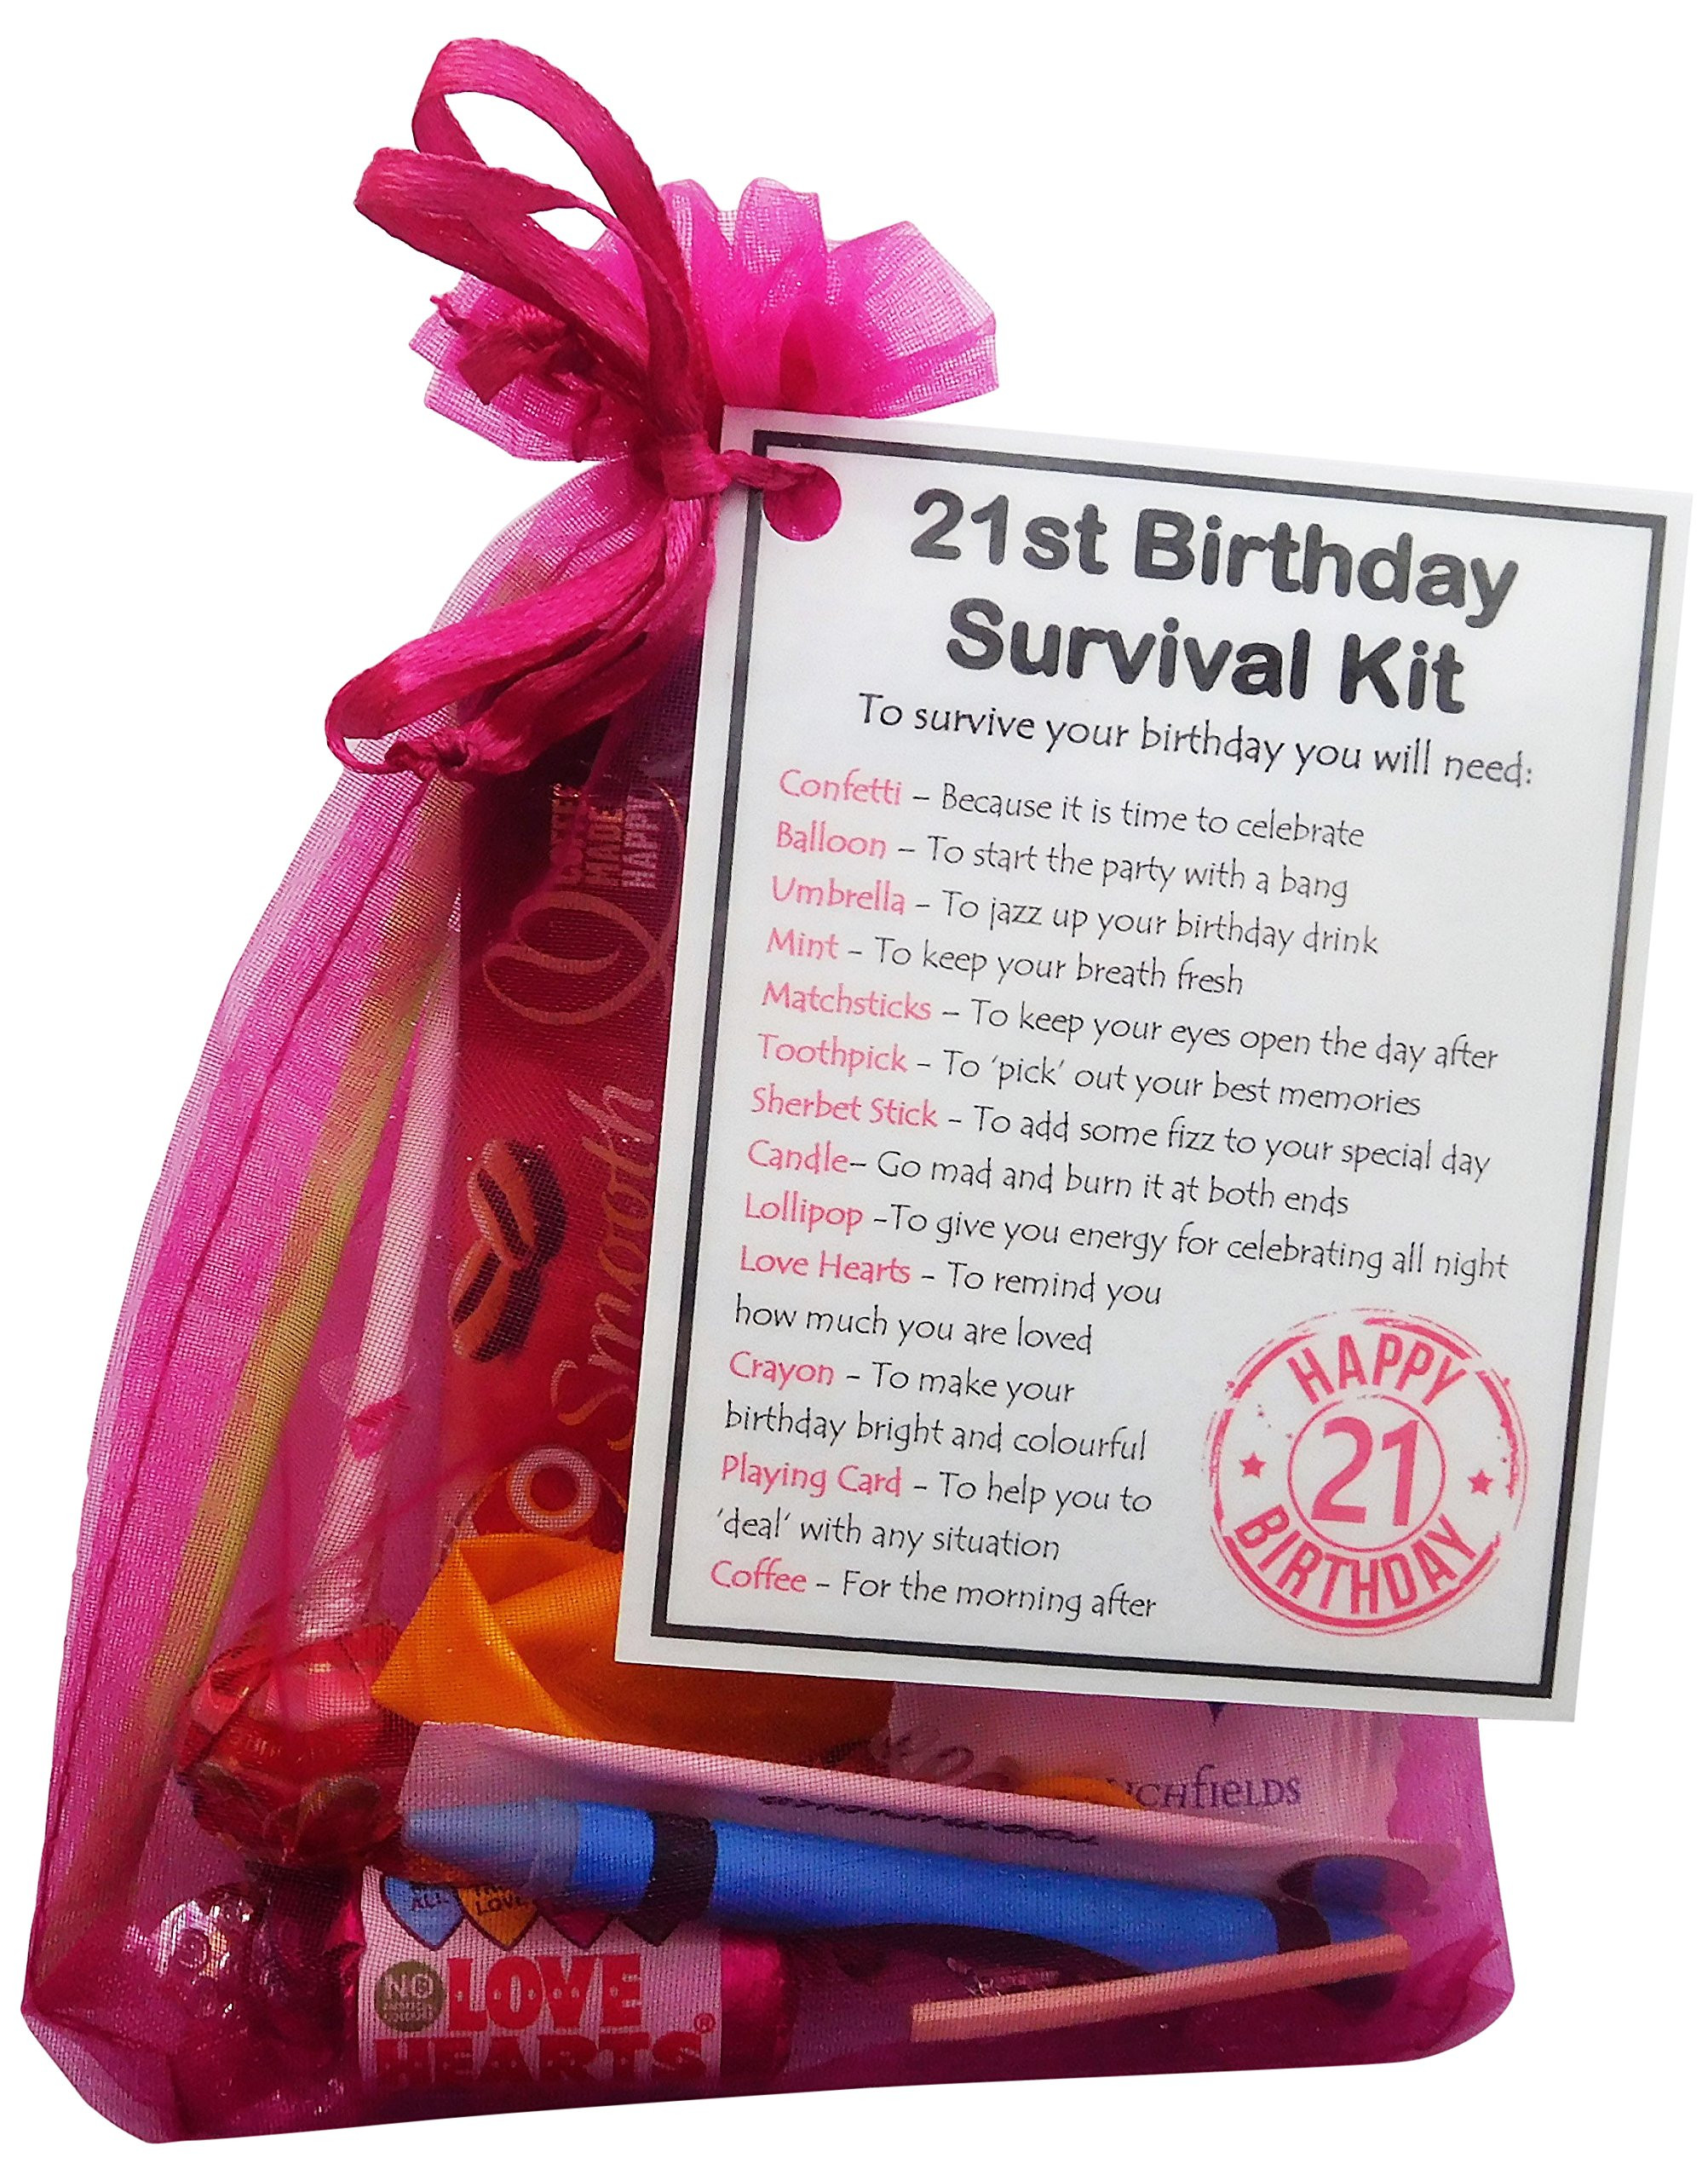 Gifts For 21st Birthday For Her
 21st Birthday Gifts for Her Keepsake Amazon